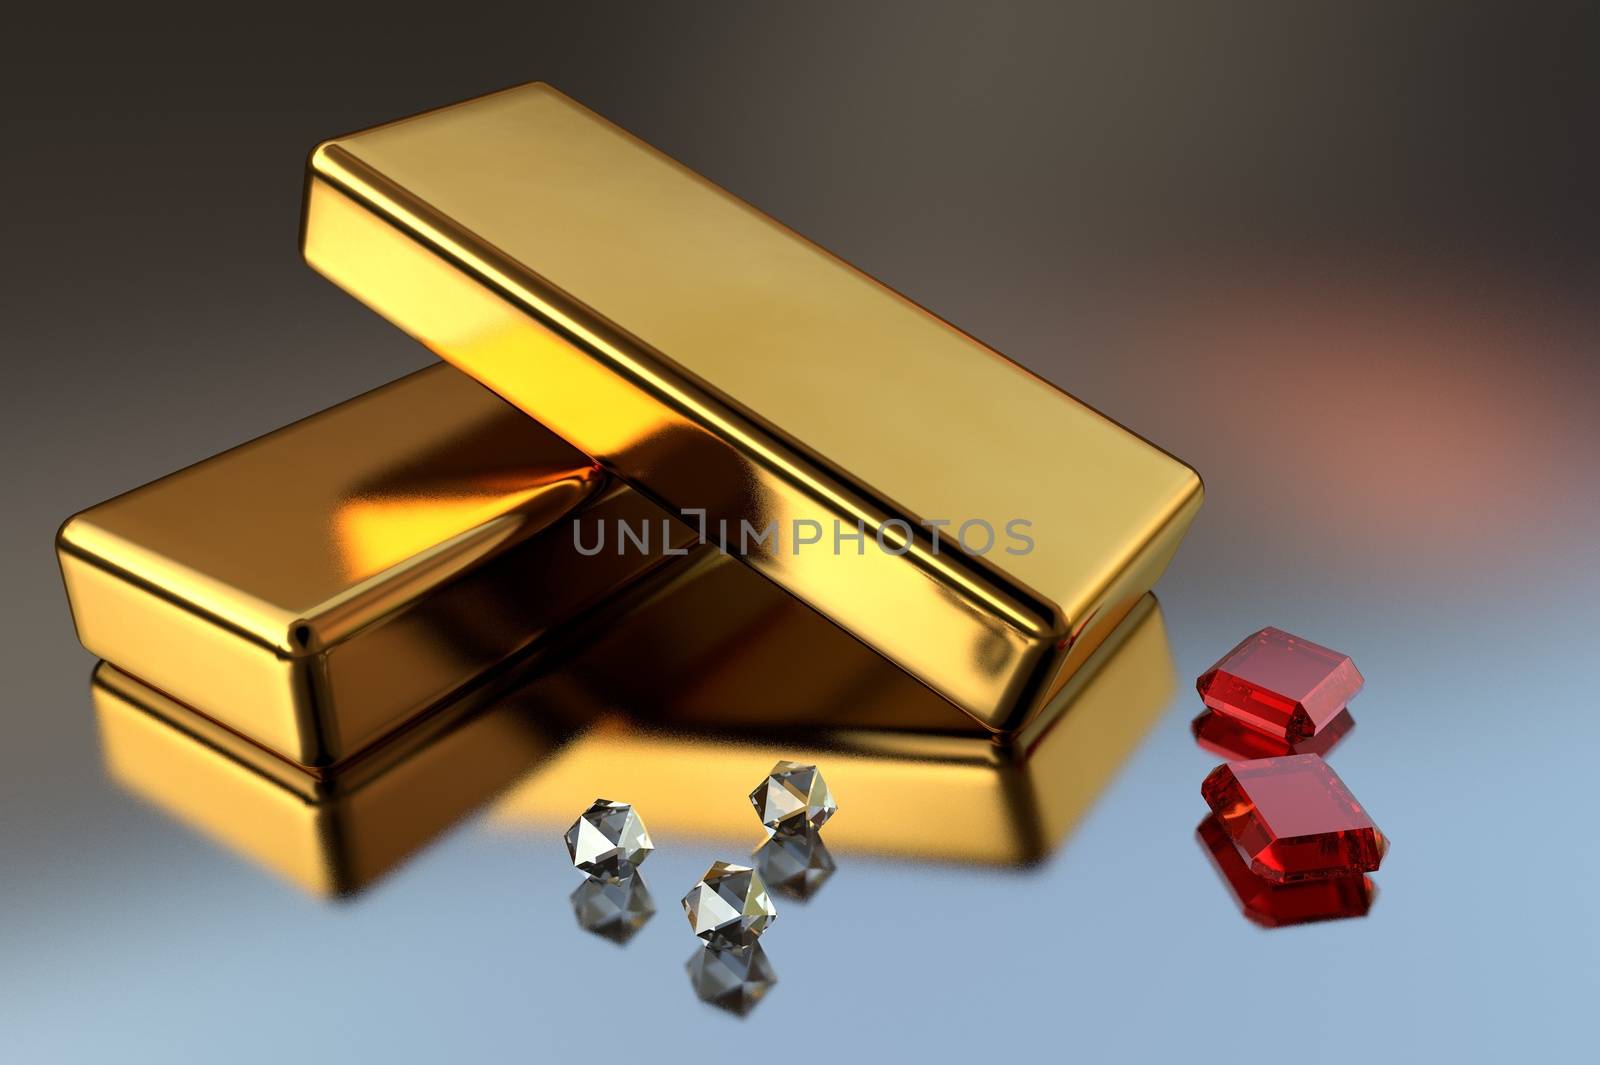 3D gems and gold bars lie on a reflective surface in the form of wealth and luxury